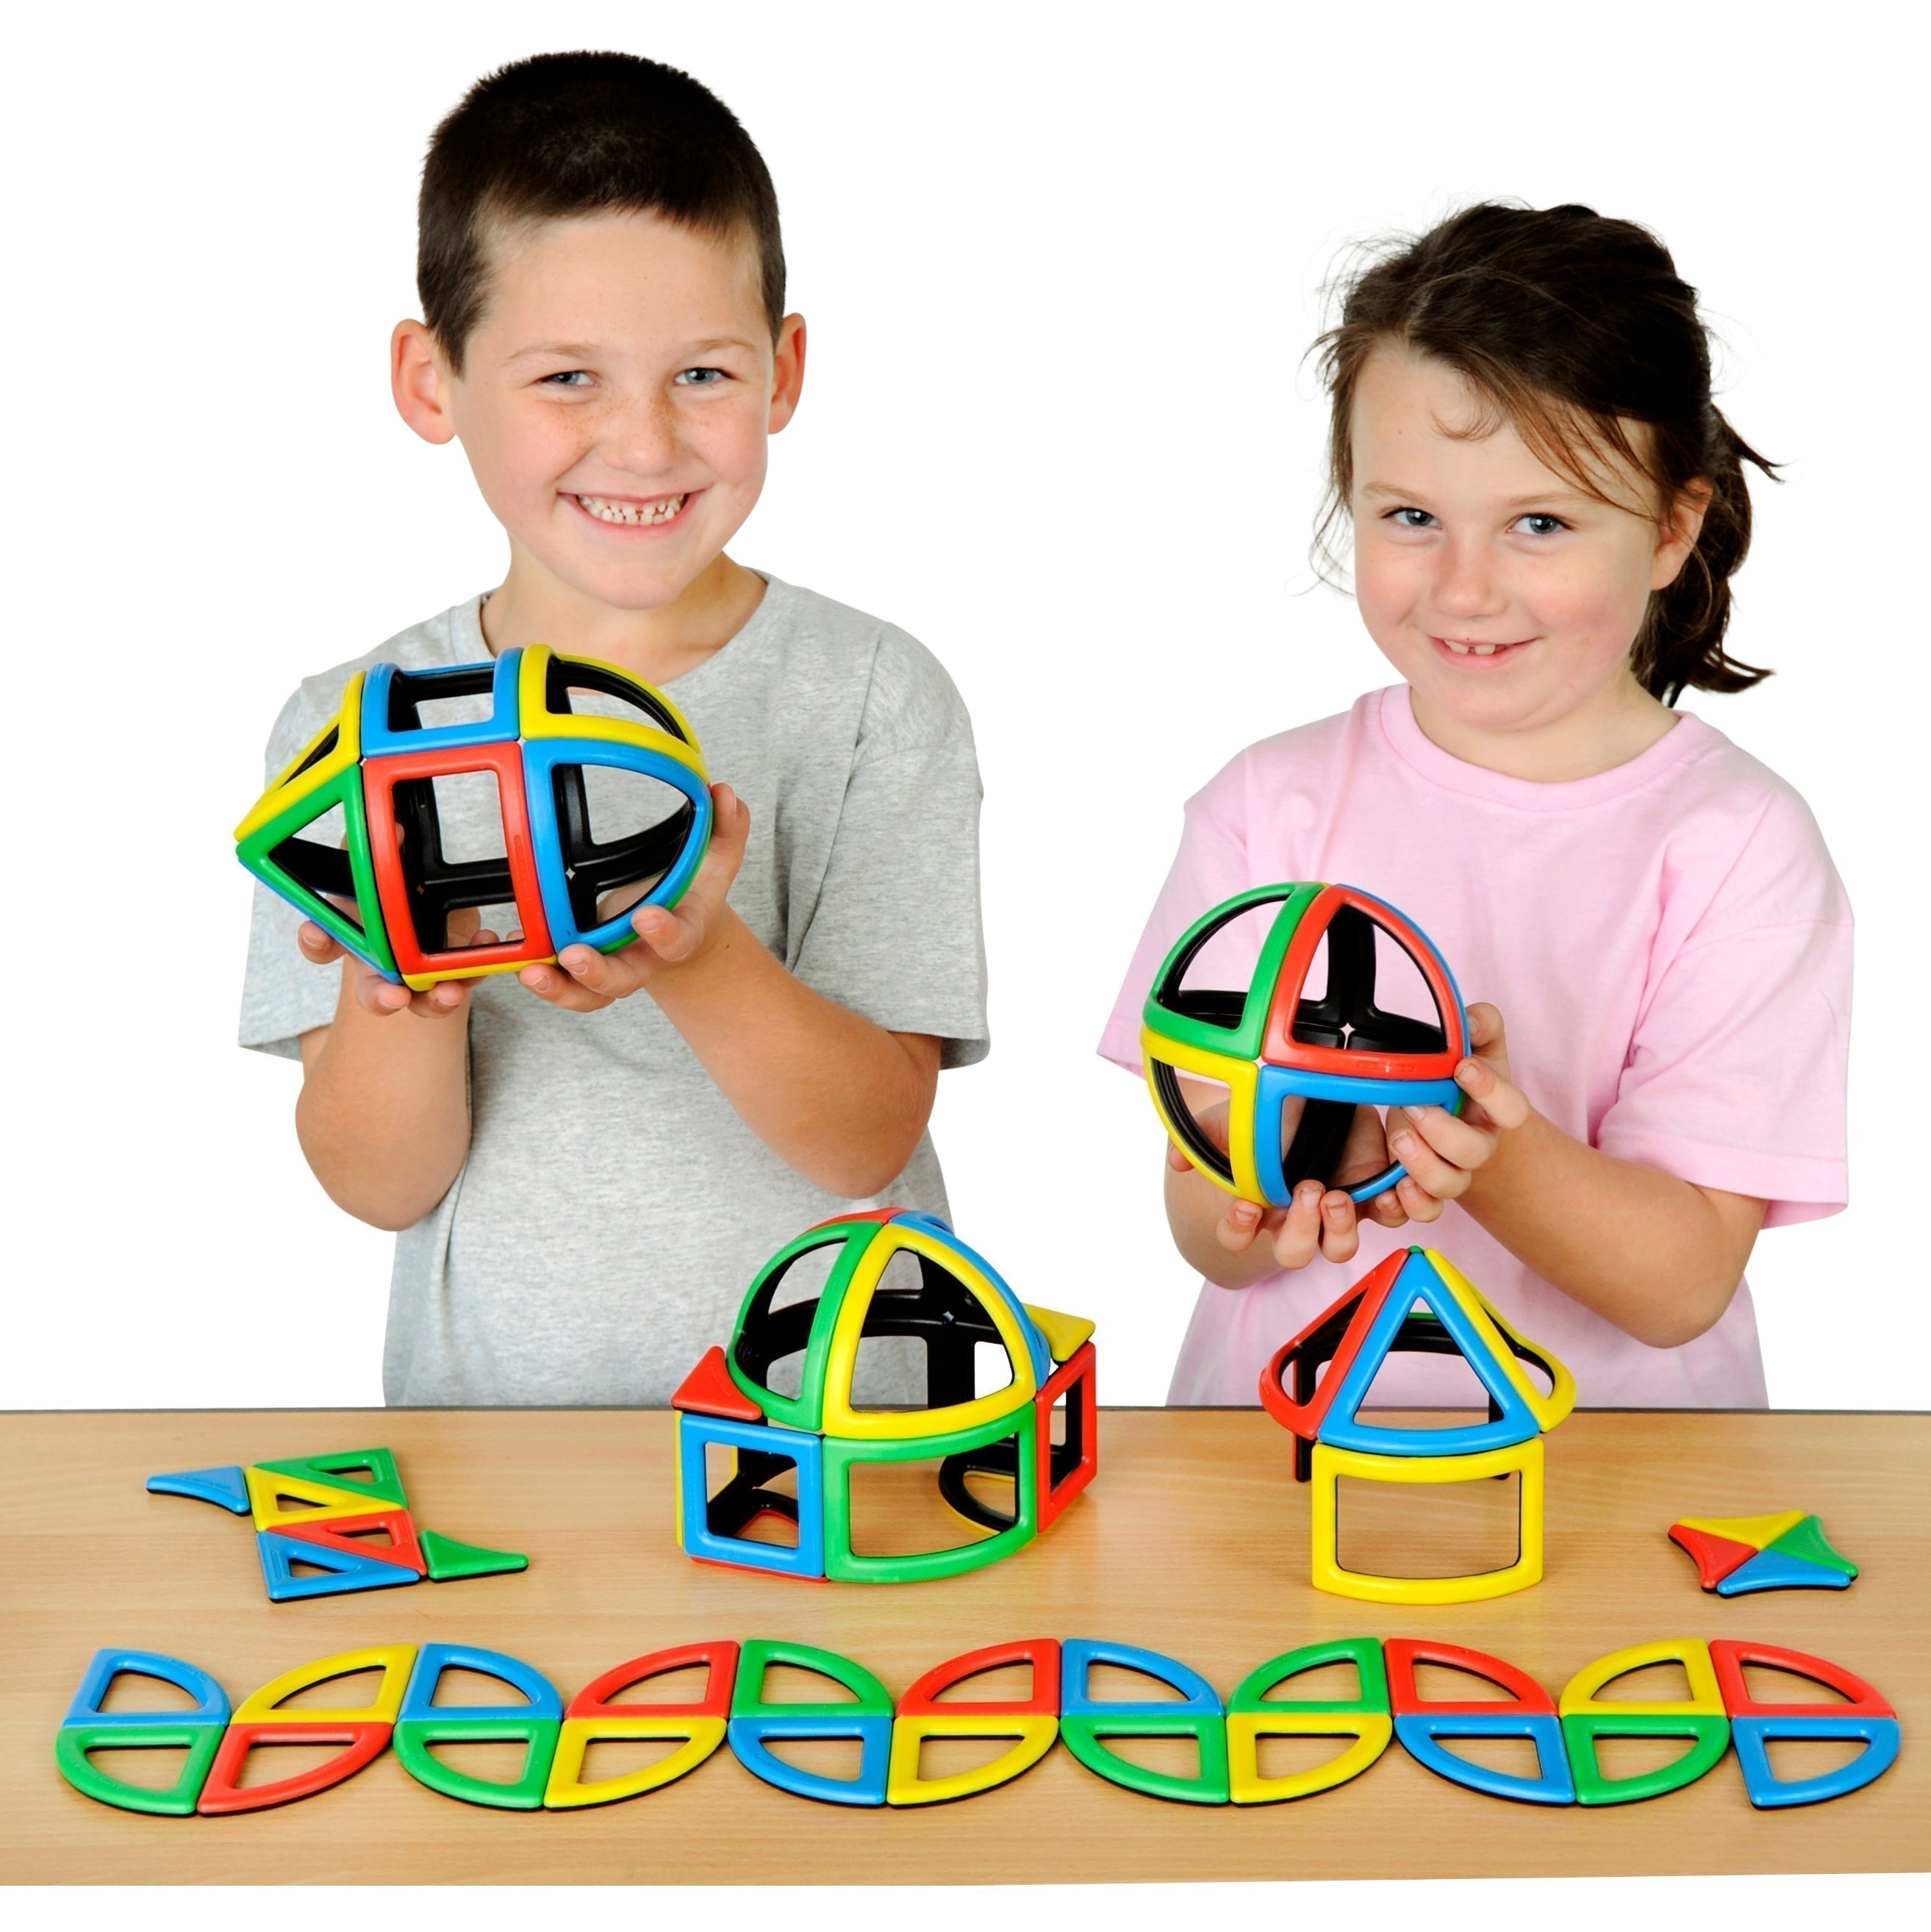 Magnetic Polydron Sphera Class Set pk 72, Introduce your classroom to the world of magnetic construction with the Magnetic Polydron Sphera Class Set. With an abundance of magnetic pieces, this set enables children to explore and construct a variety of shapes, including spheres, cylinders, and cones.Containing enough pieces for a whole classroom of children, the Magnetic Polydron Sphera Class Set provides ample resources for hands-on learning and discovery. Students can easily connect the magnetic pieces to 